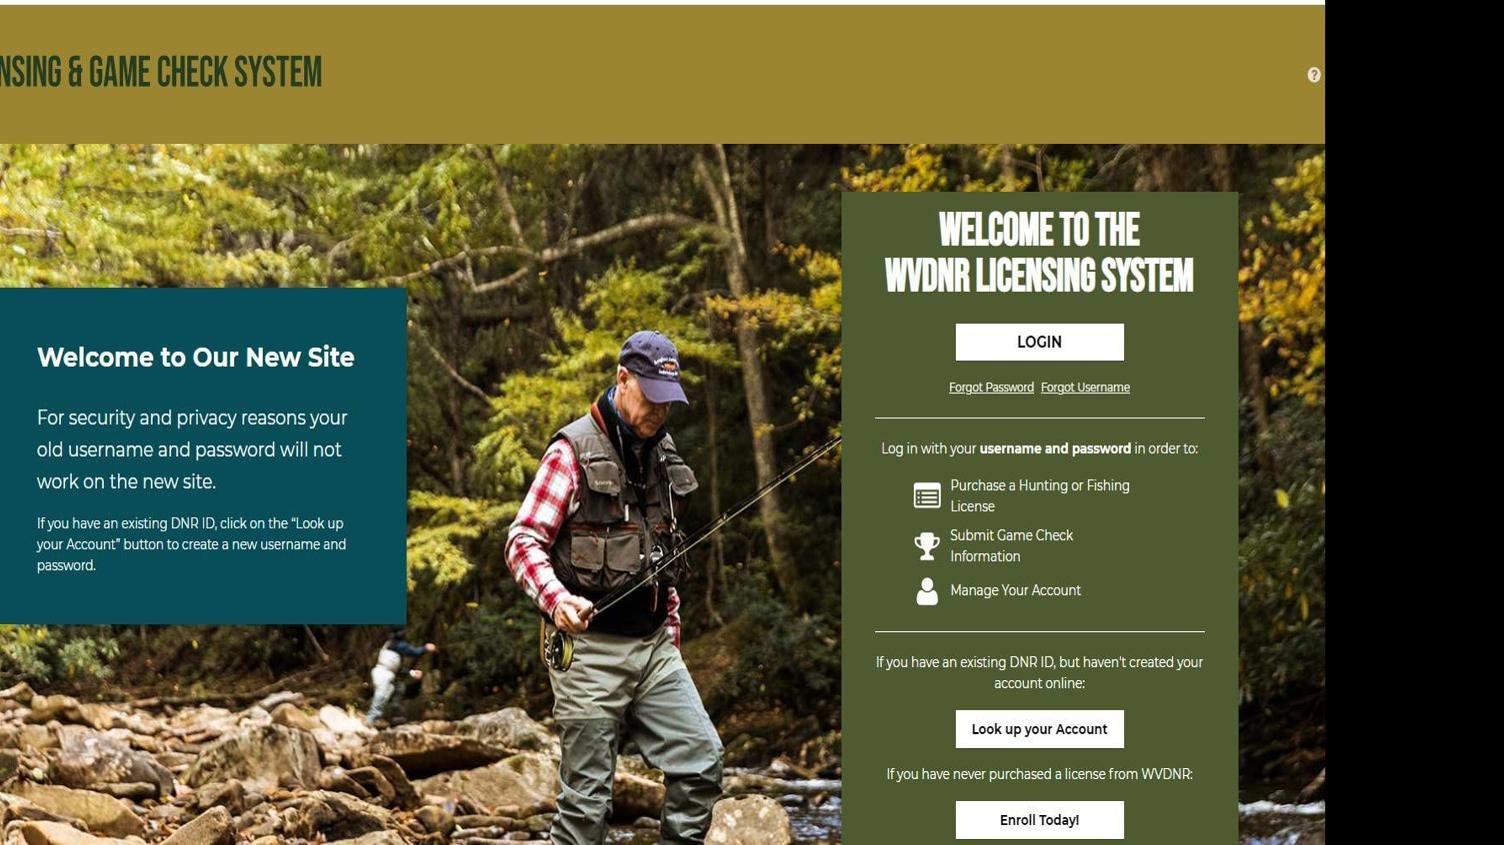 West Virginia DNR rolls out new electronic licensing system for hunters,  anglers, WV News